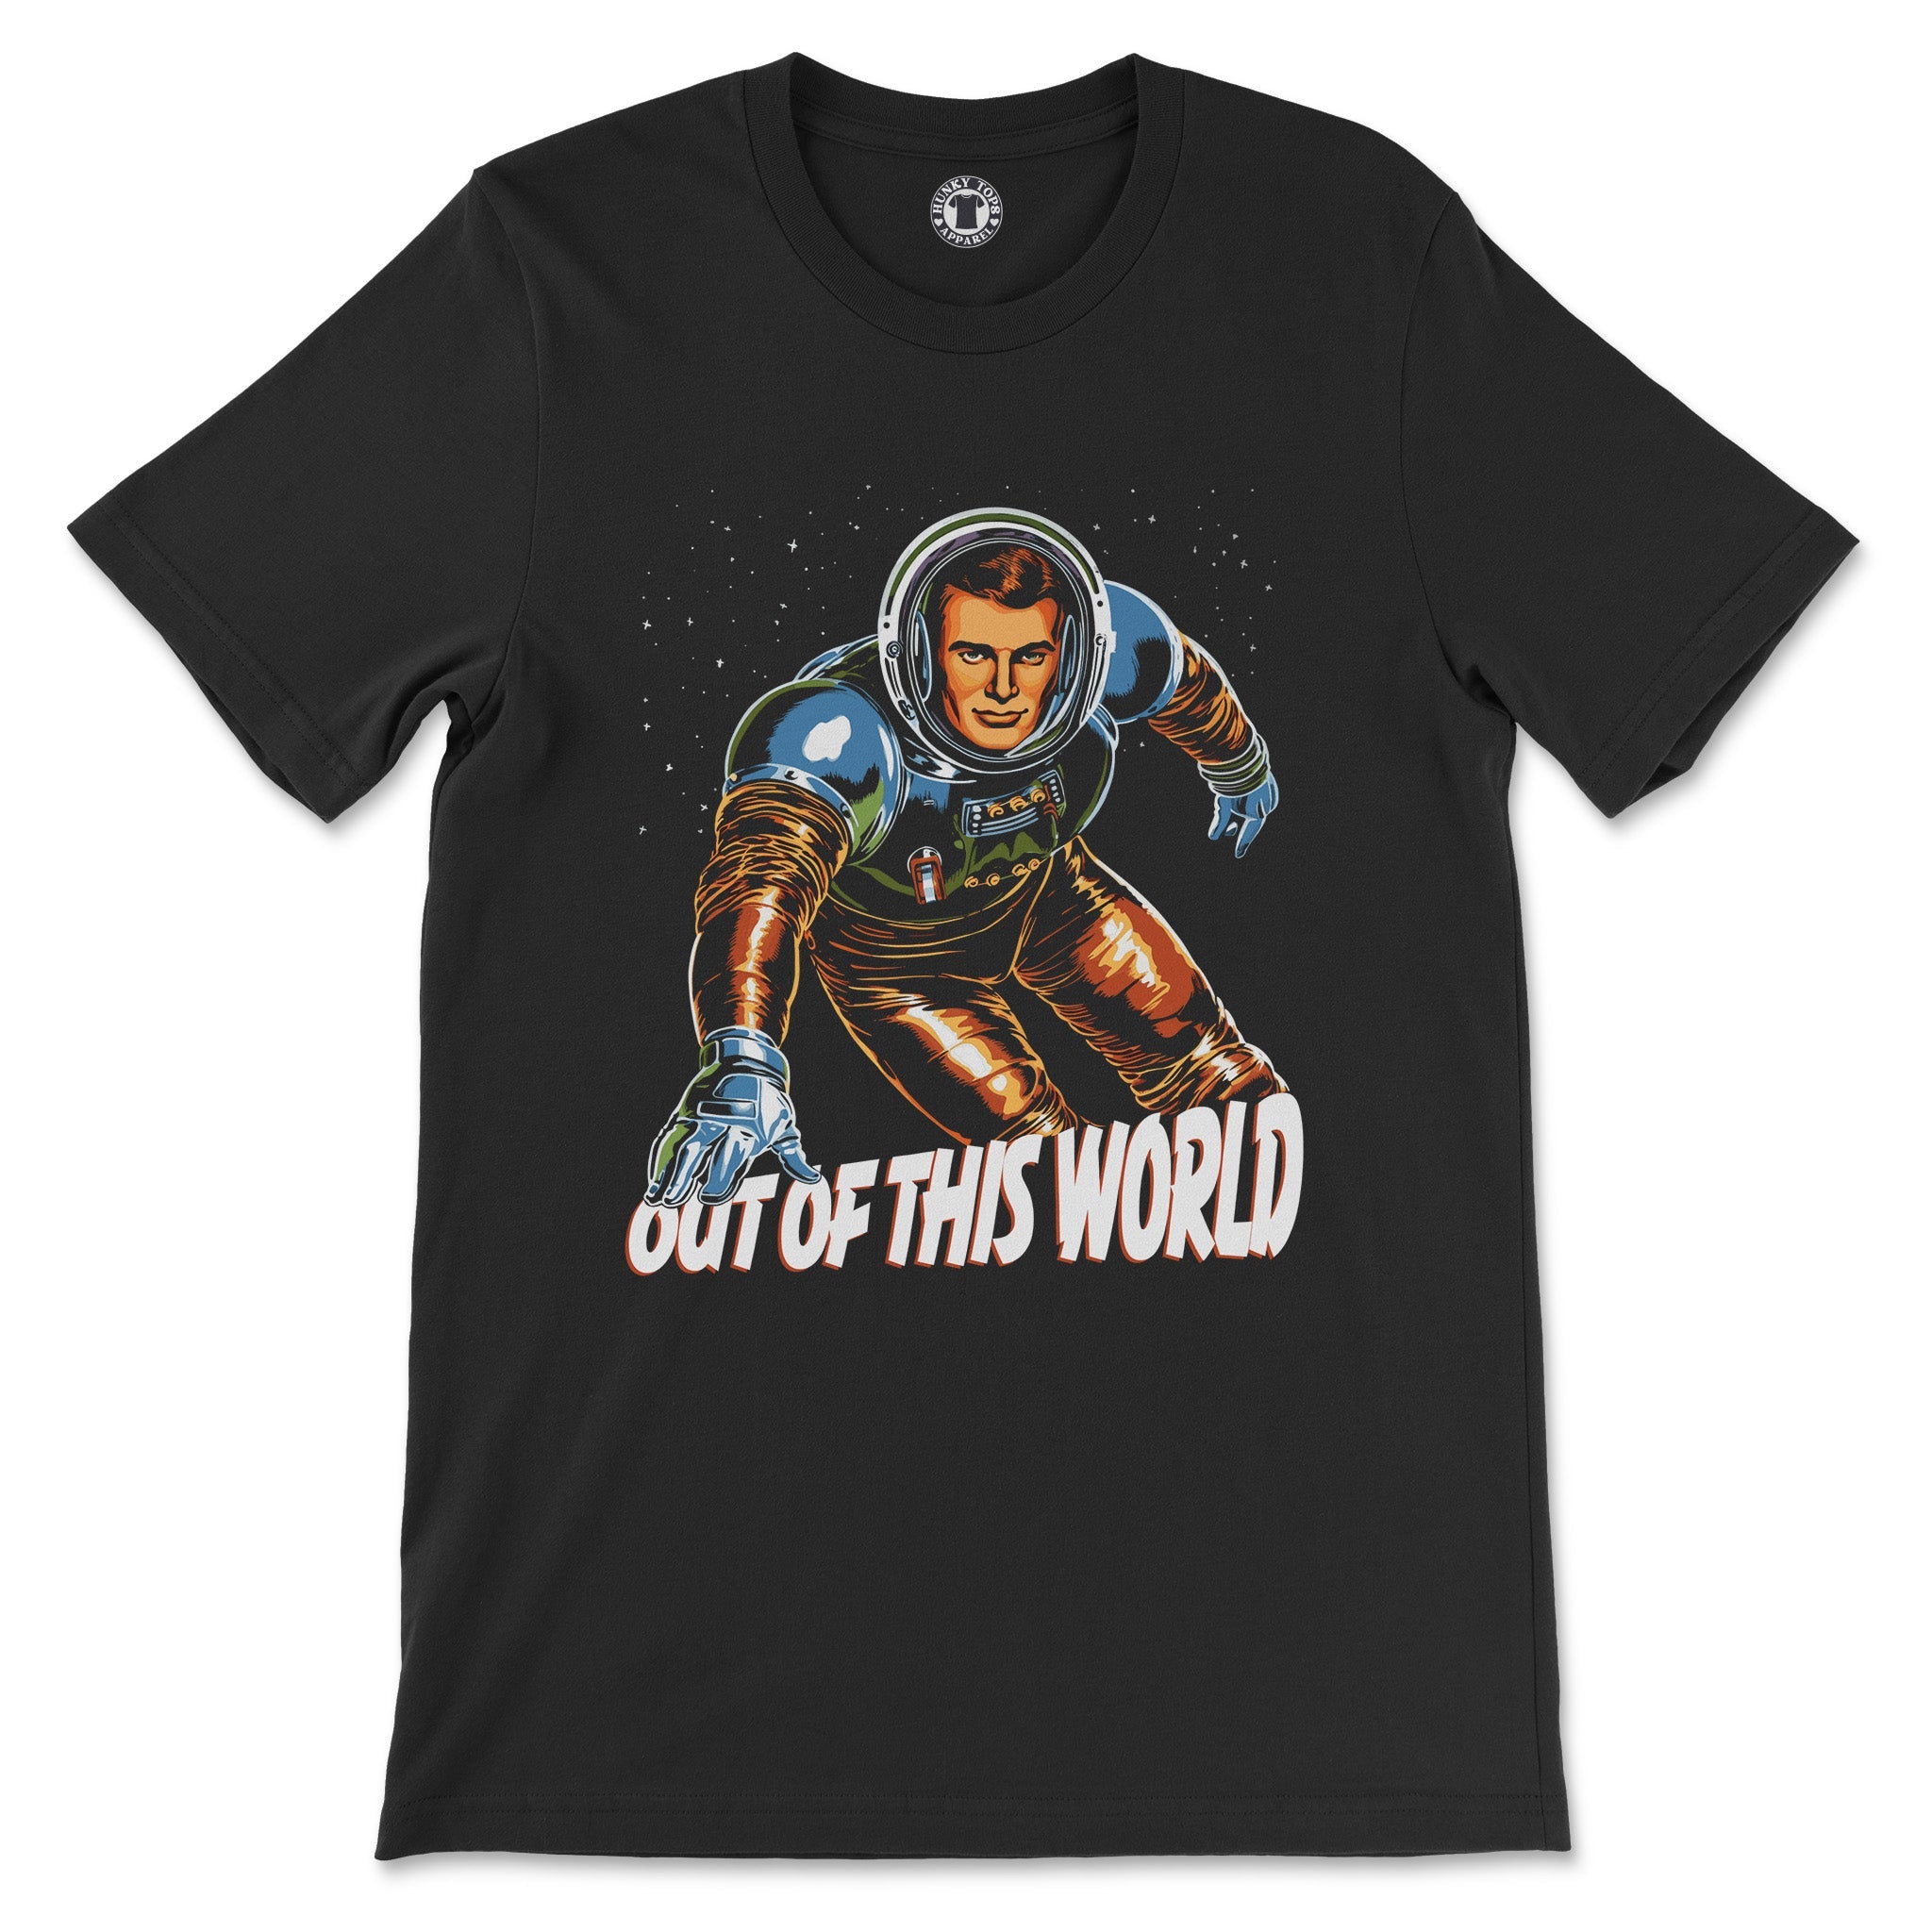 "Out of This World" Astronaut Tee - Hunky Tops